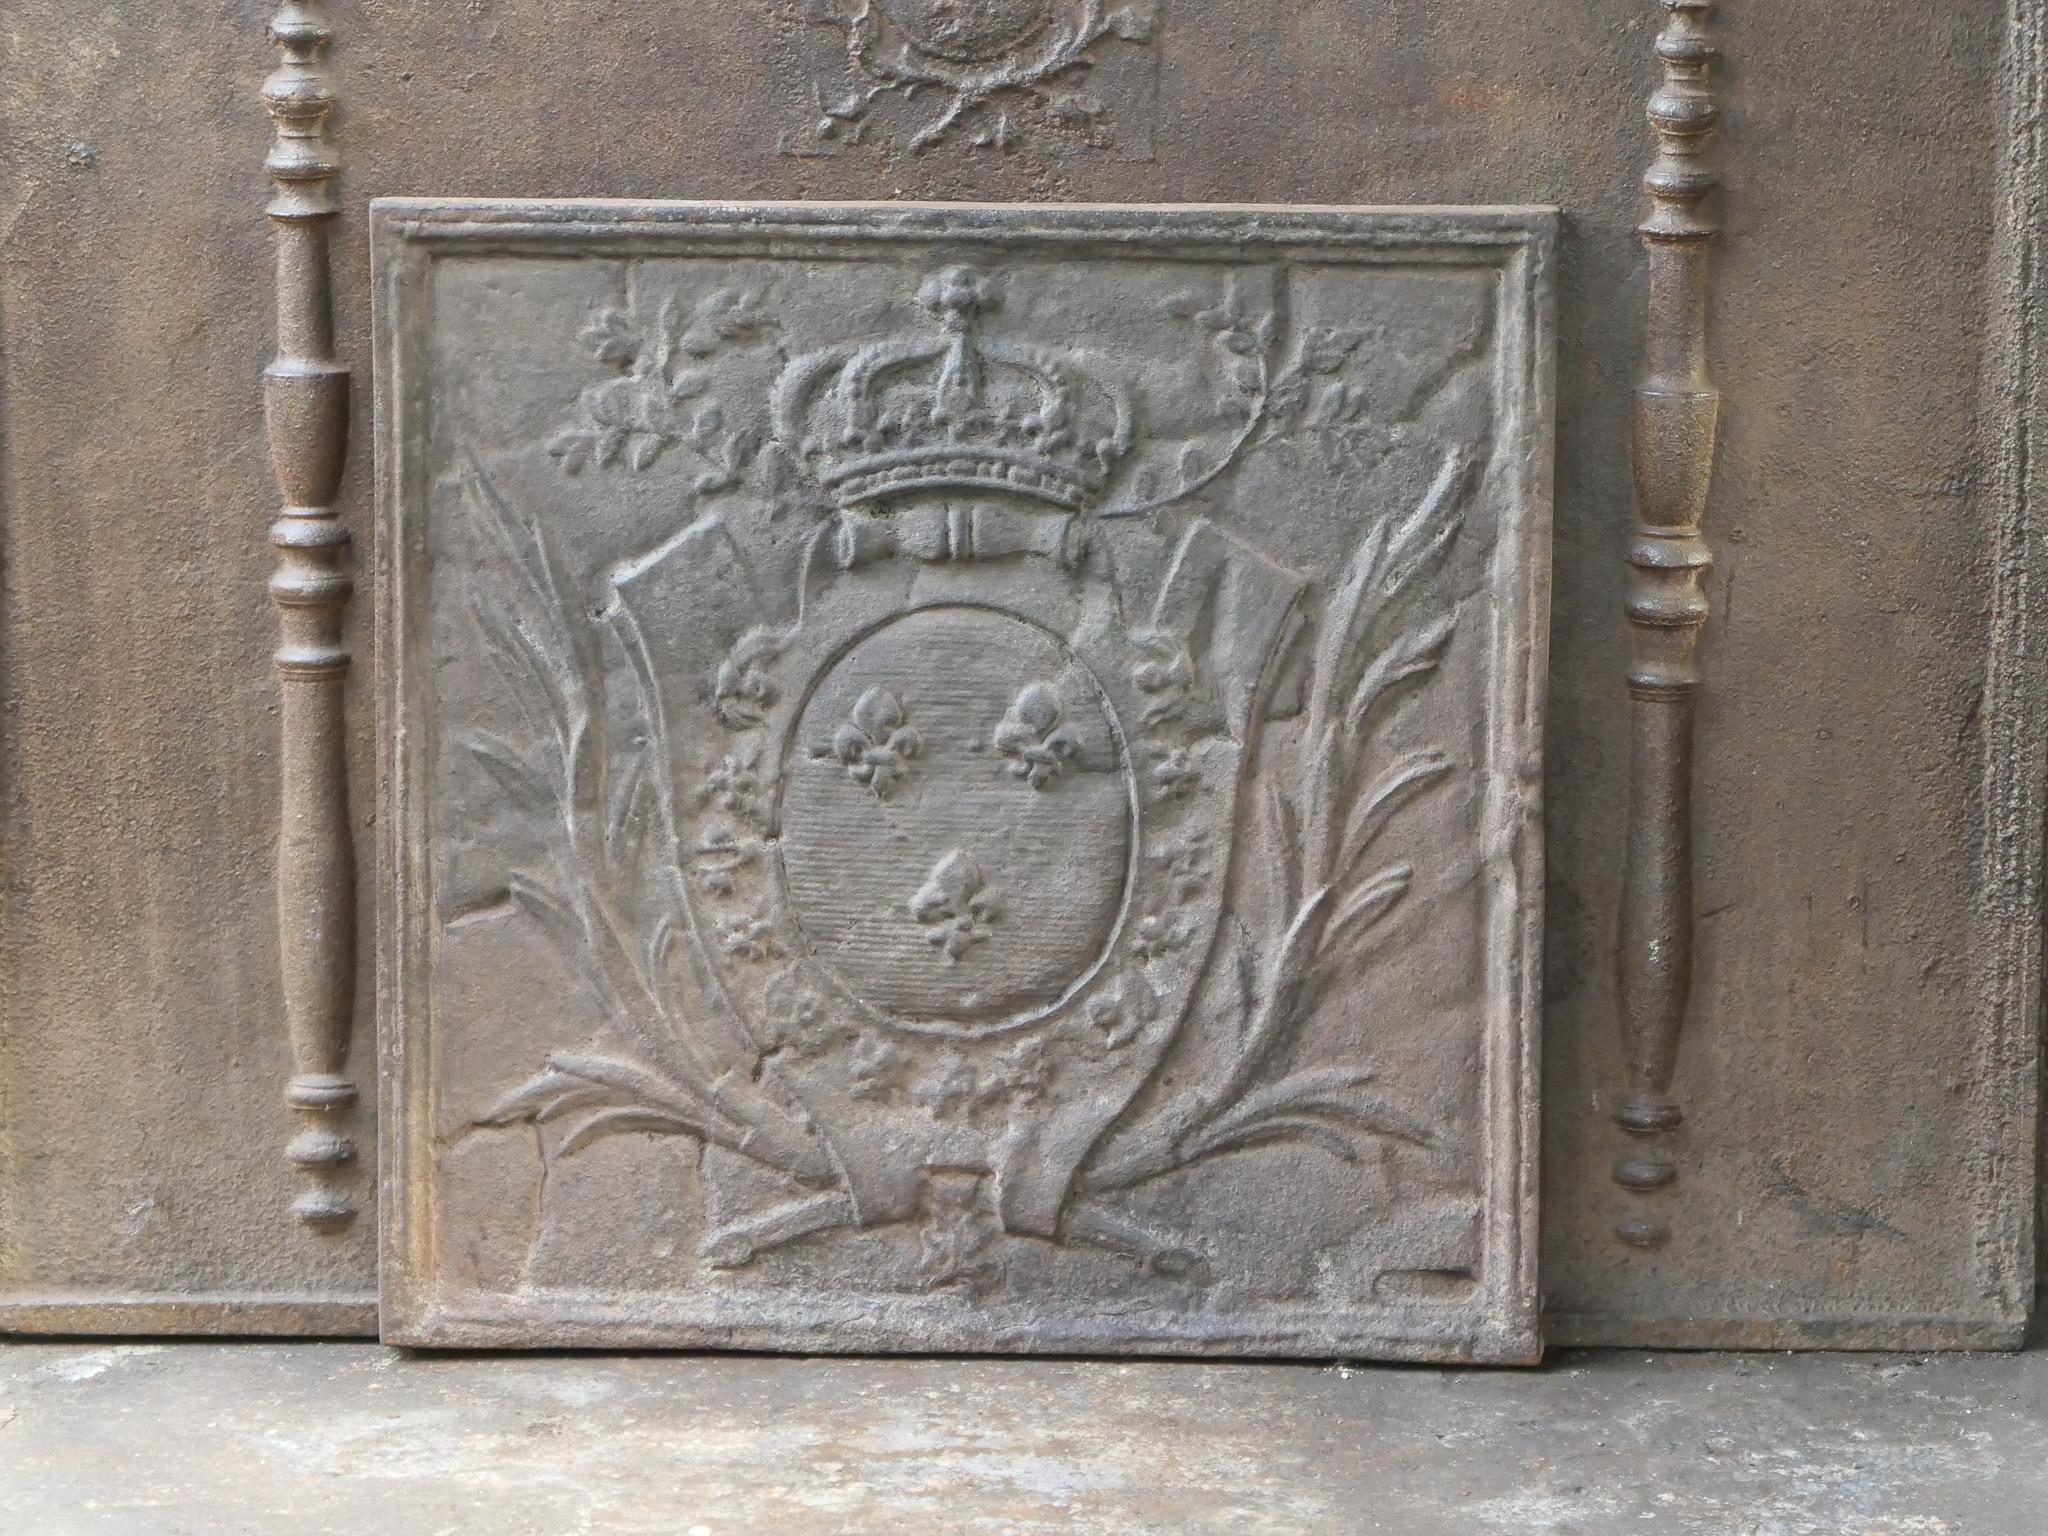  20th century French Louis XV style fireback with the arms of France. This is the coat of arms of the House of Bourbon, an originally French royal house that became a major dynasty in Europe. It delivered kings for Spain (Navarra), France, both